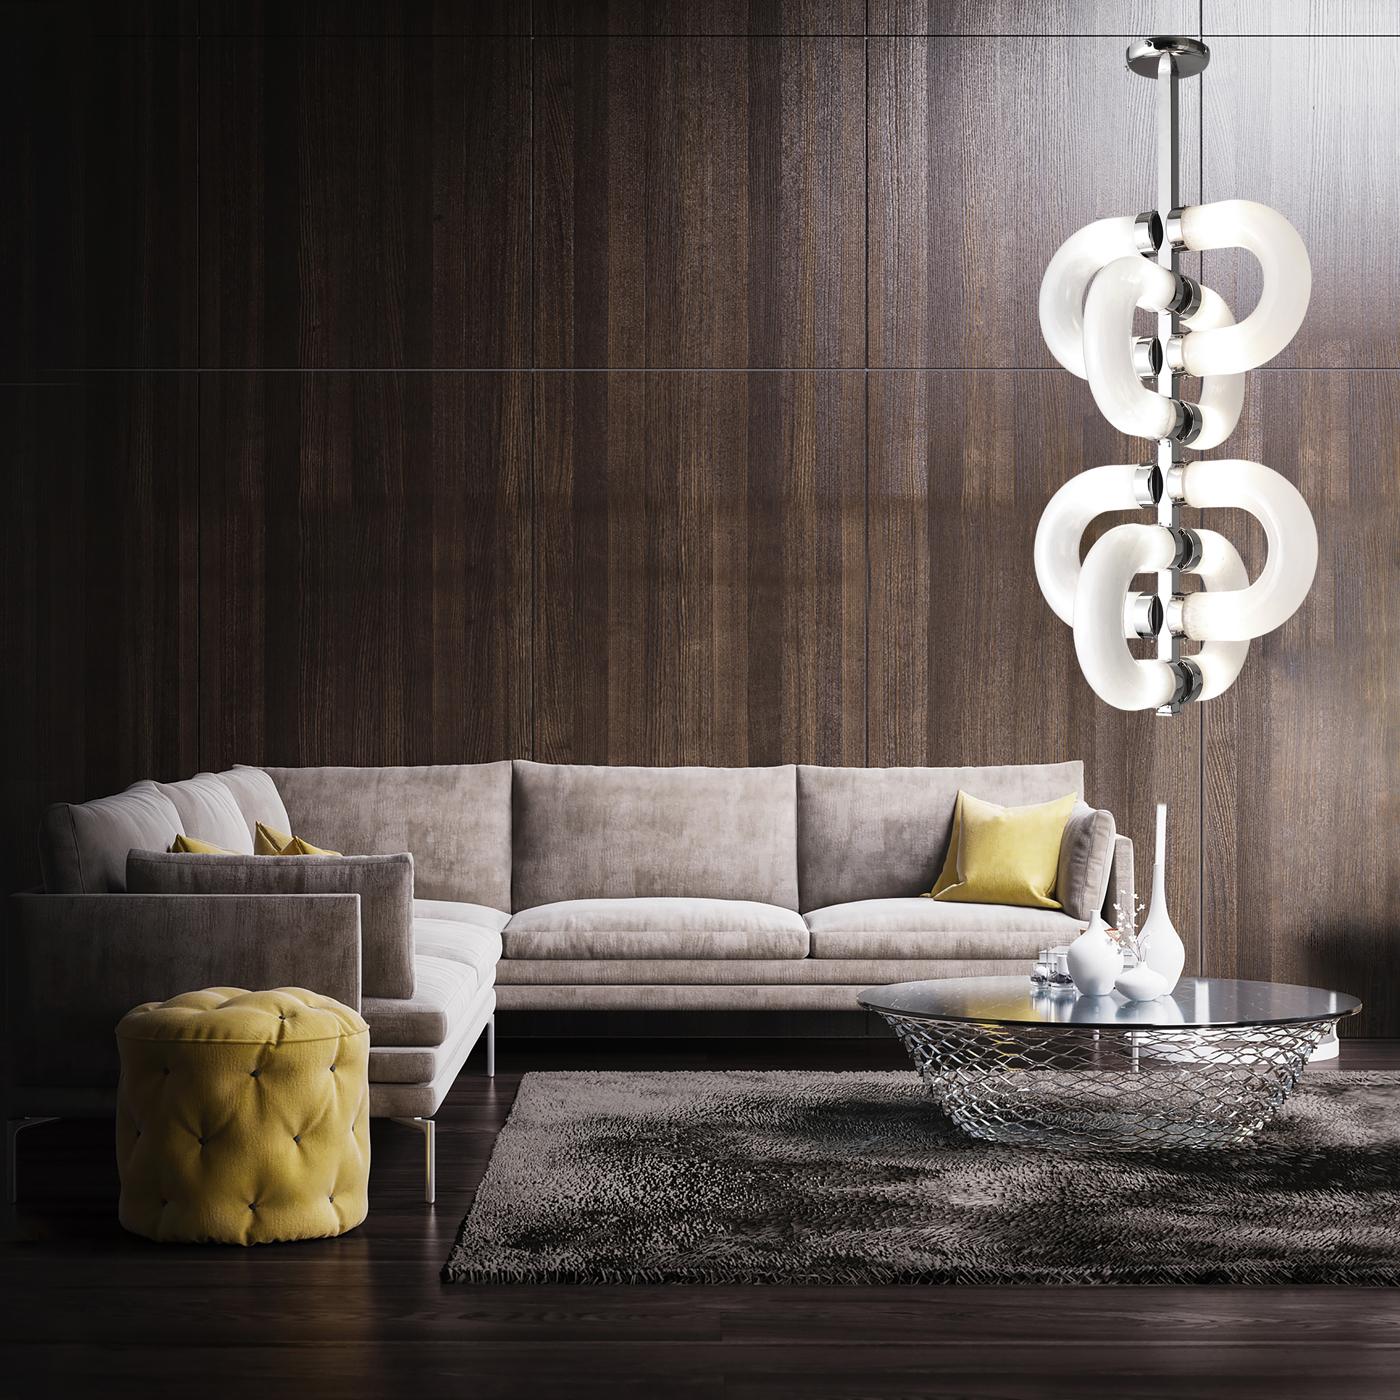 The enthralling design of this sophisticated chandelier is achieved through the interlocking silhouette of cylindrical glass links, whose halves are connected to the chrome-finished, central metal frame of the chandelier. Each of these sections